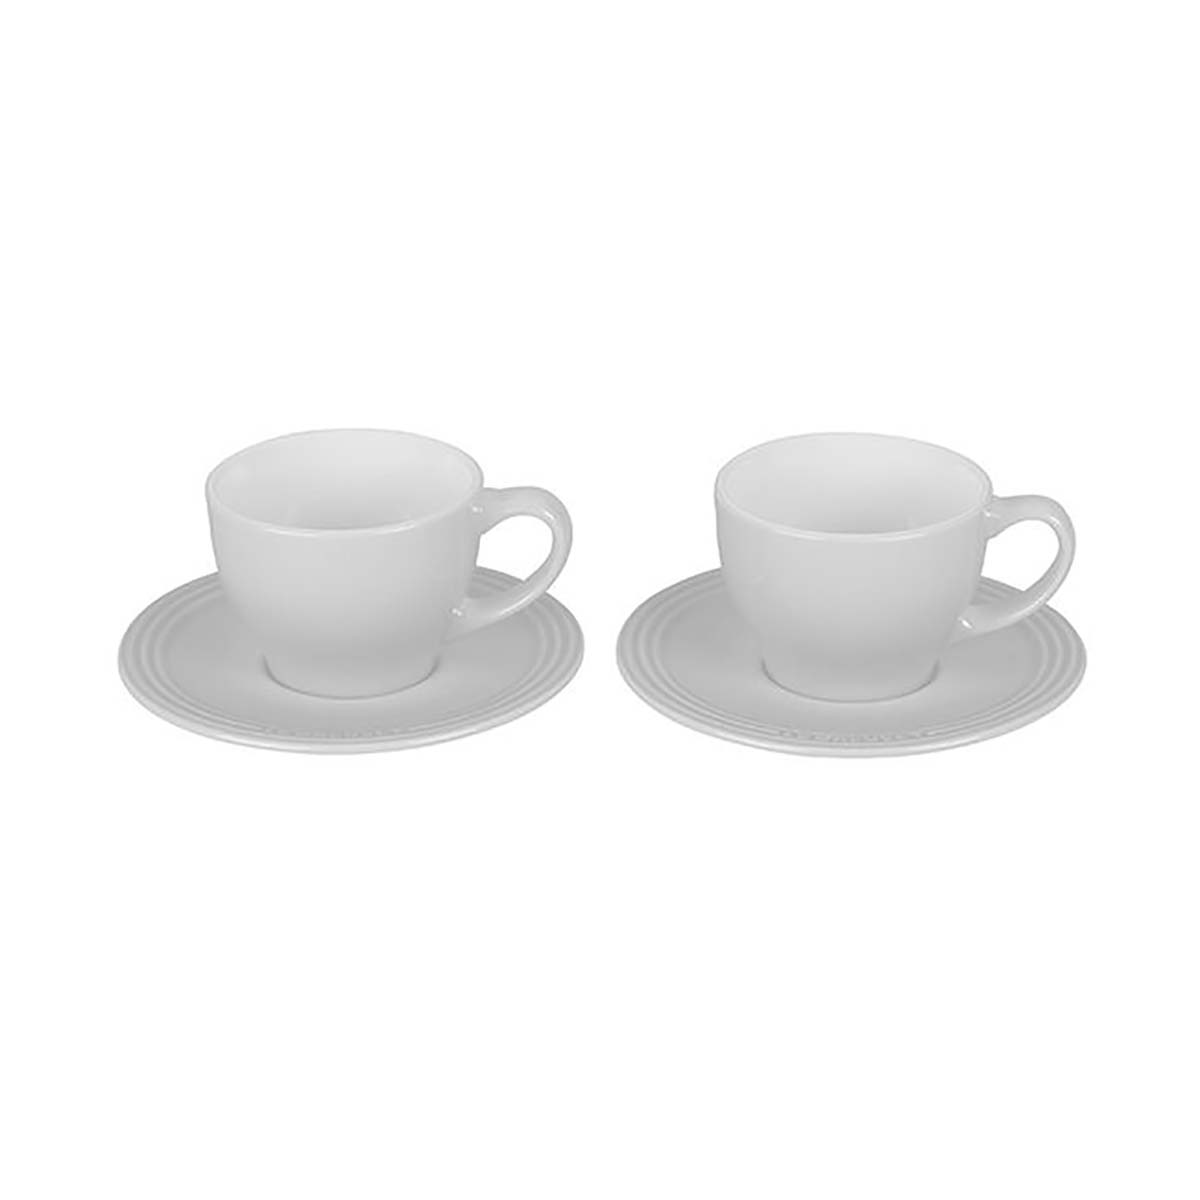 Le Creuset Cappuccino Cups and Saucers, set of 2. 7 oz - White